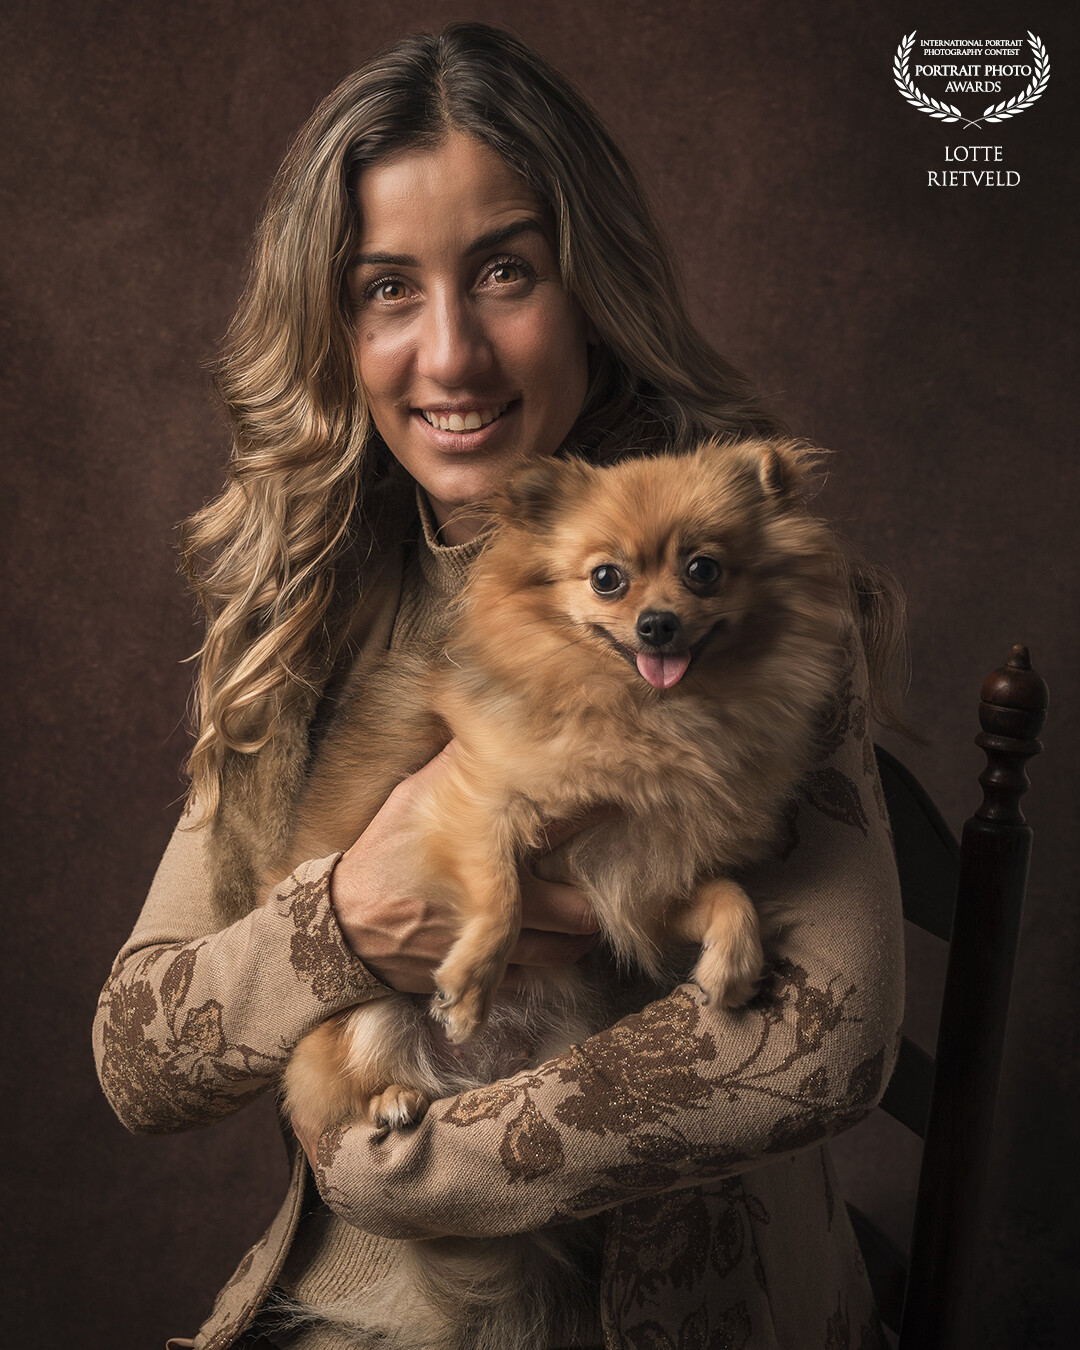 Fine Art portrait of Warda and her little dog Lou Lou, a small, cheerful Pomeranian. The elegance and friendship between her and her dog, combined with the subtle colors, make this portrait a delight to look at.